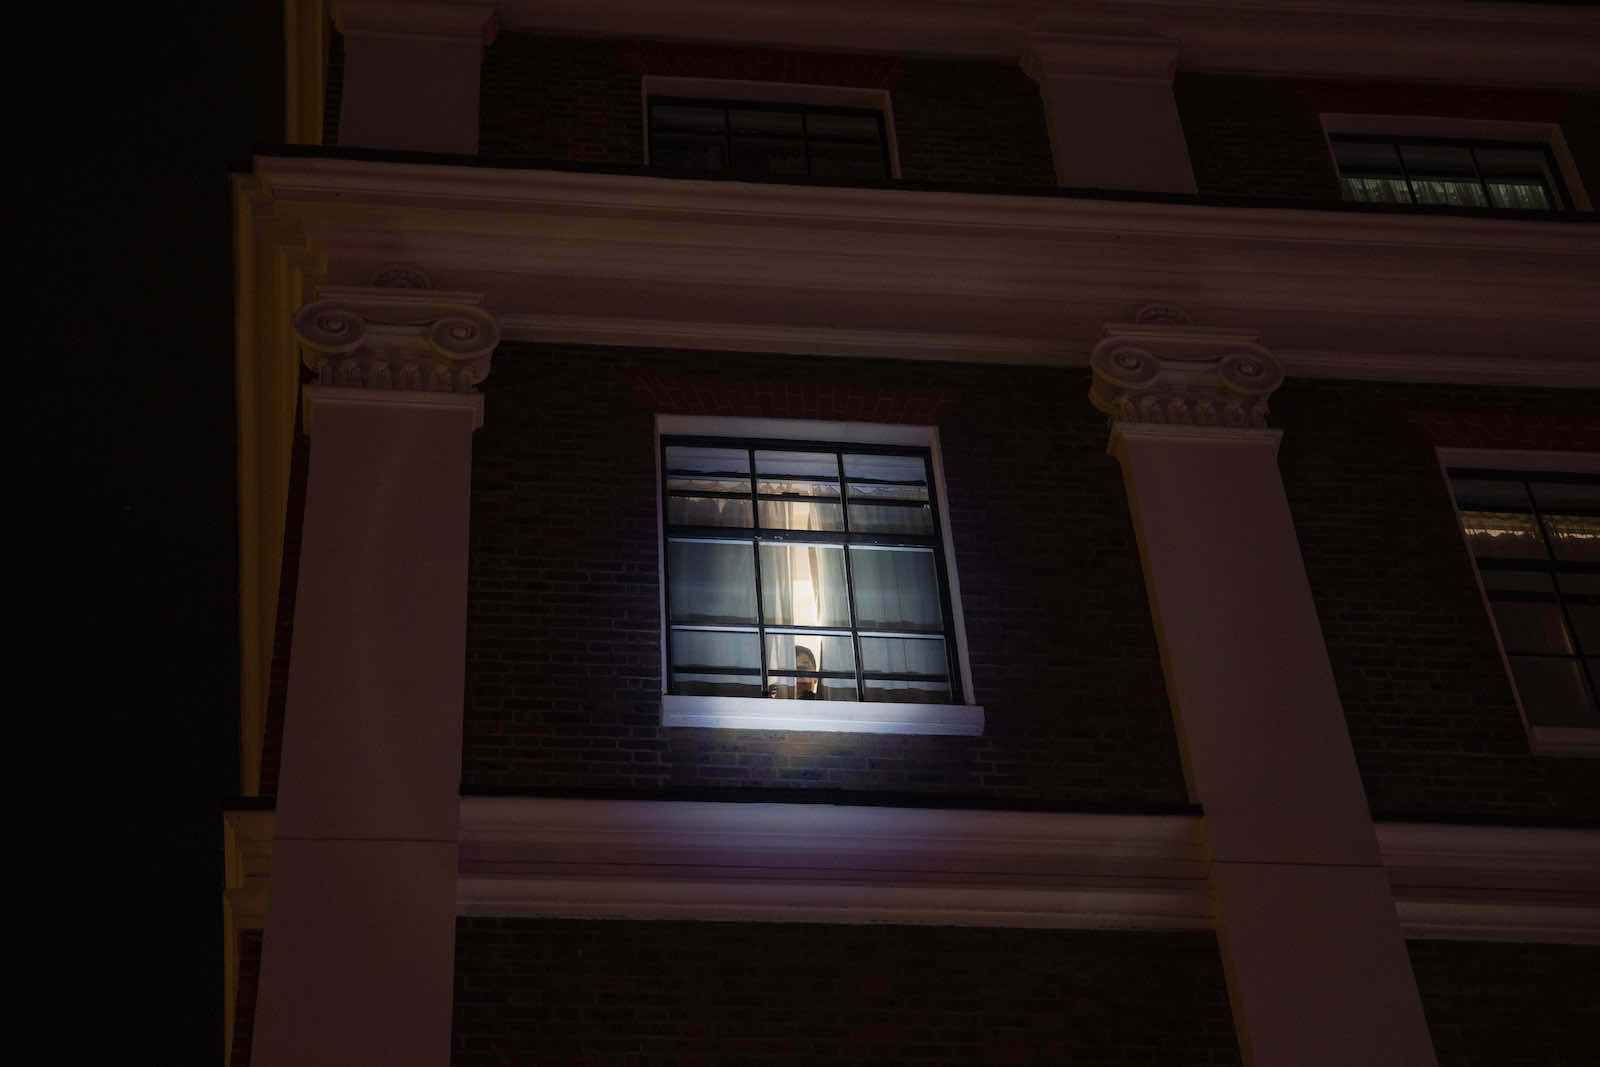 A member of the Chinese embassy in London staff peeks at protests in October demonstrating against the treatment of ethnic minority communities in China (Hesther Ng via Getty Images)